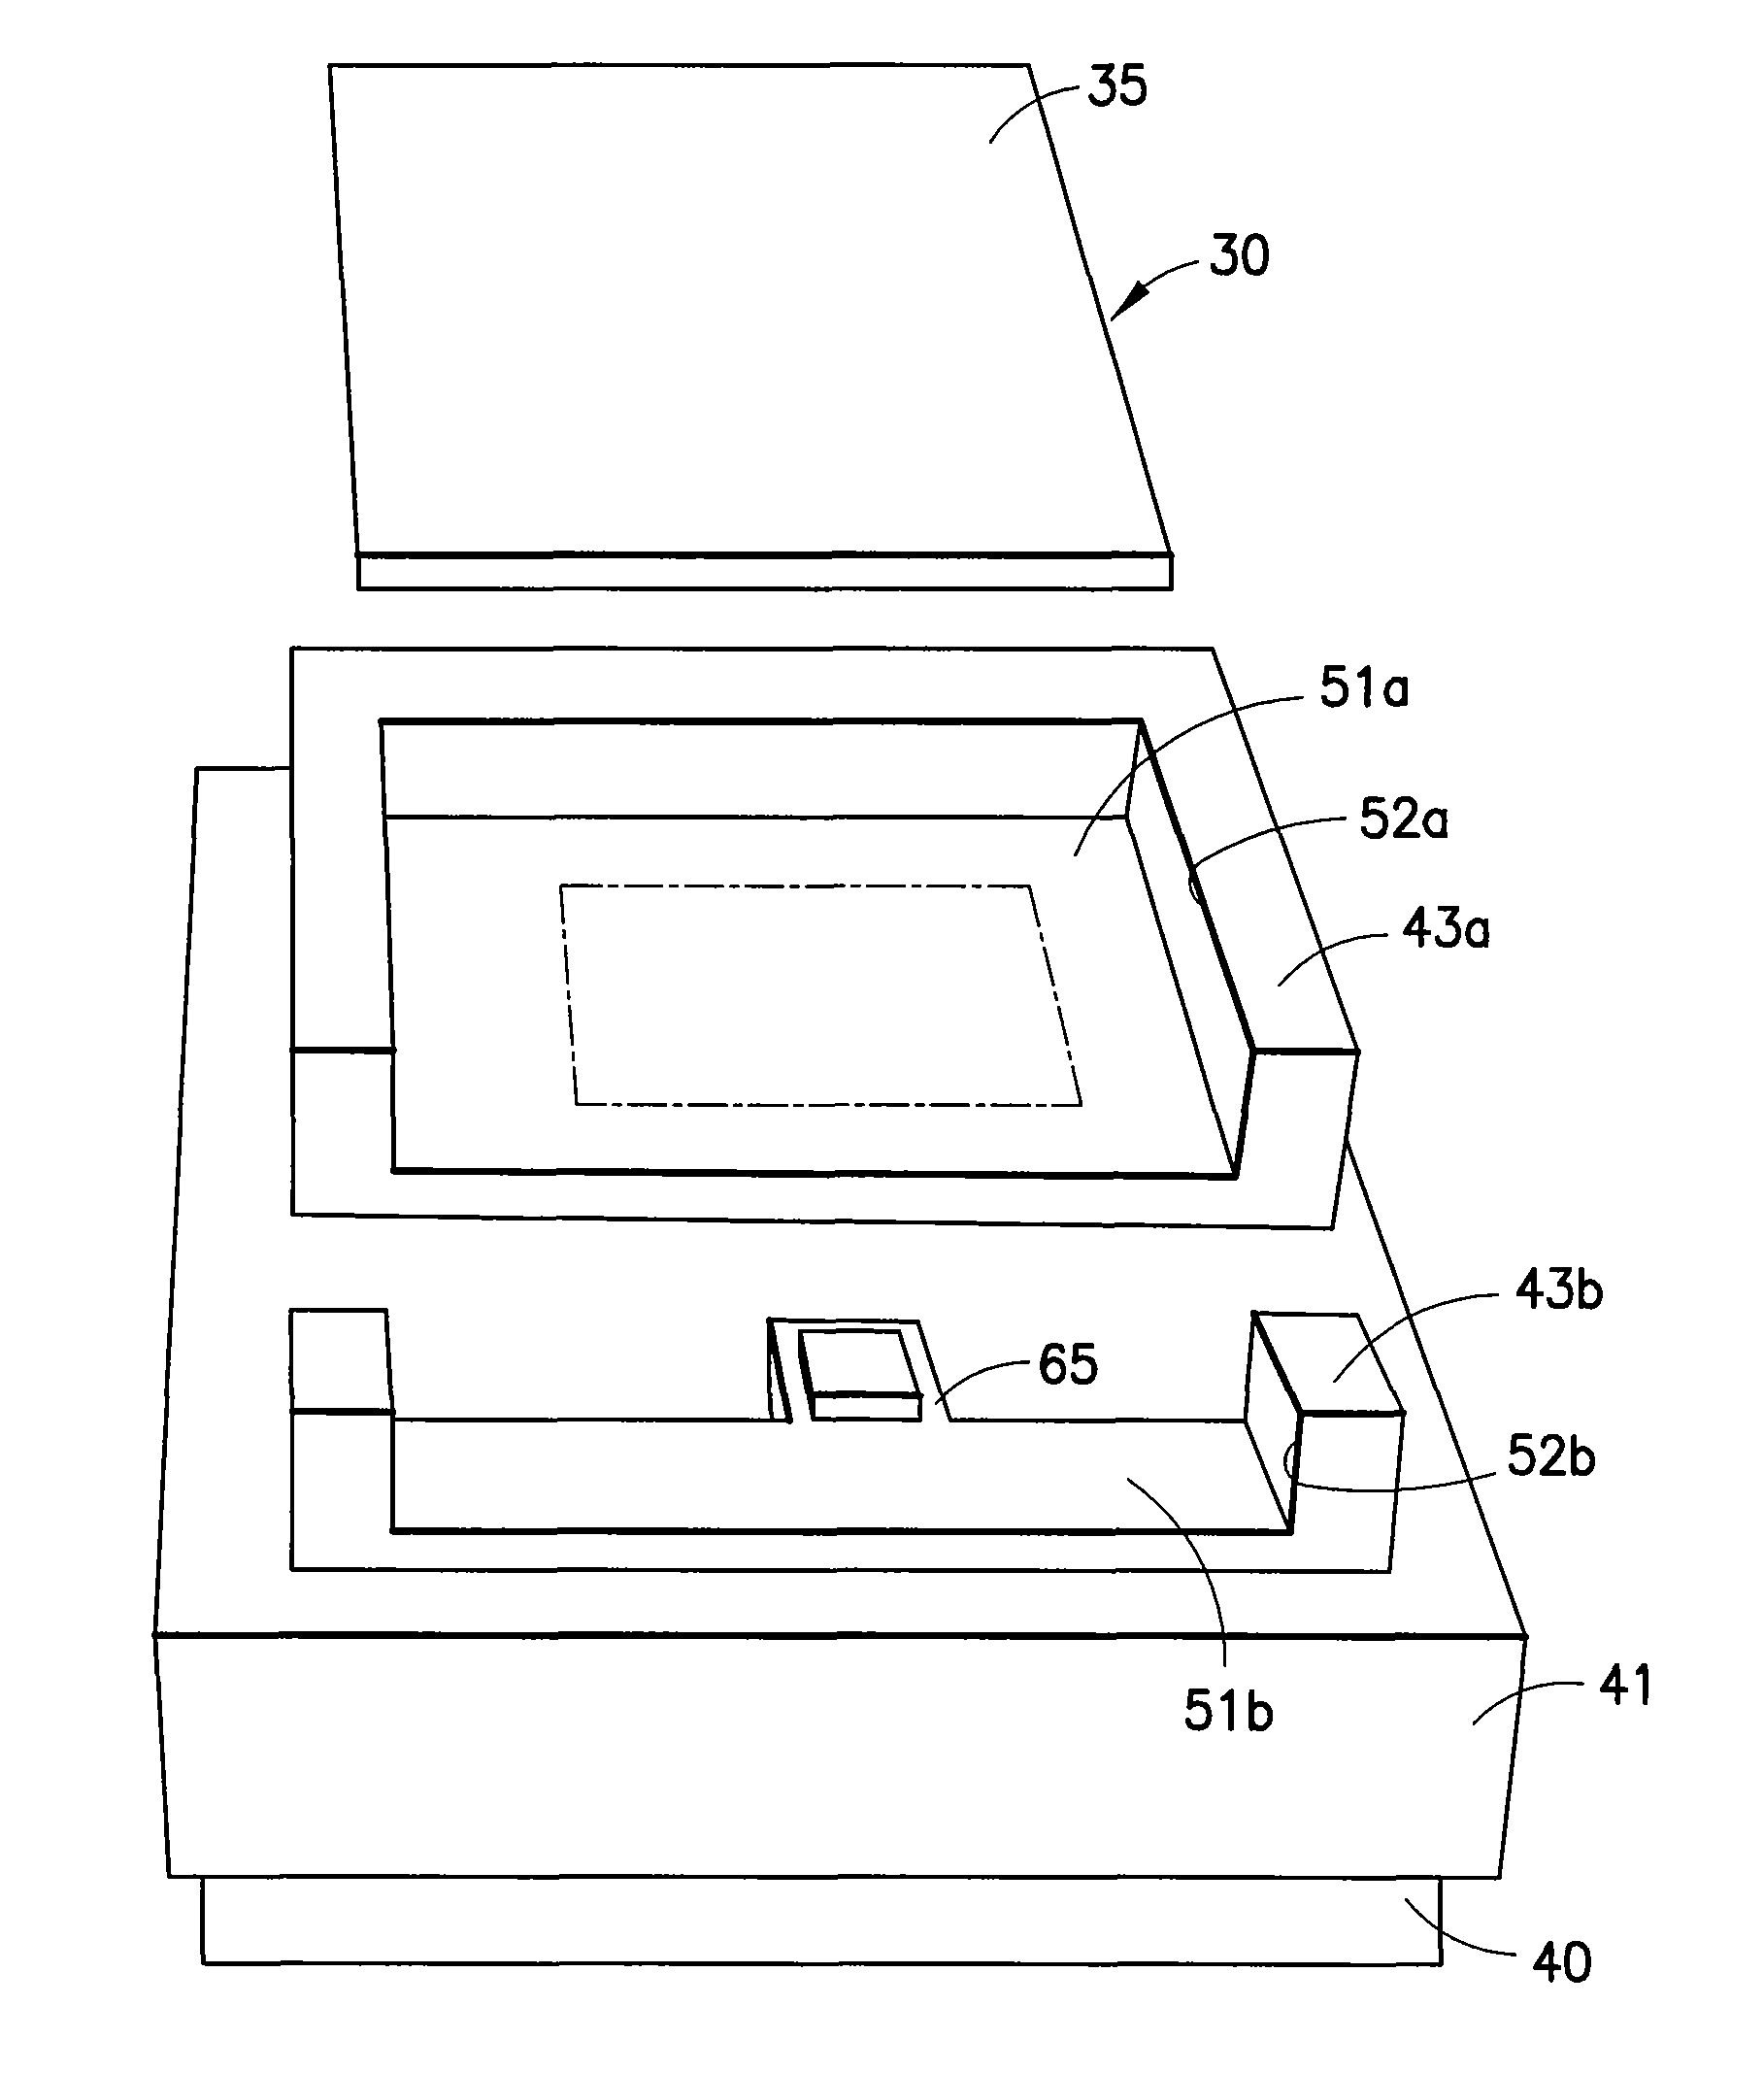 Package for high power density devices